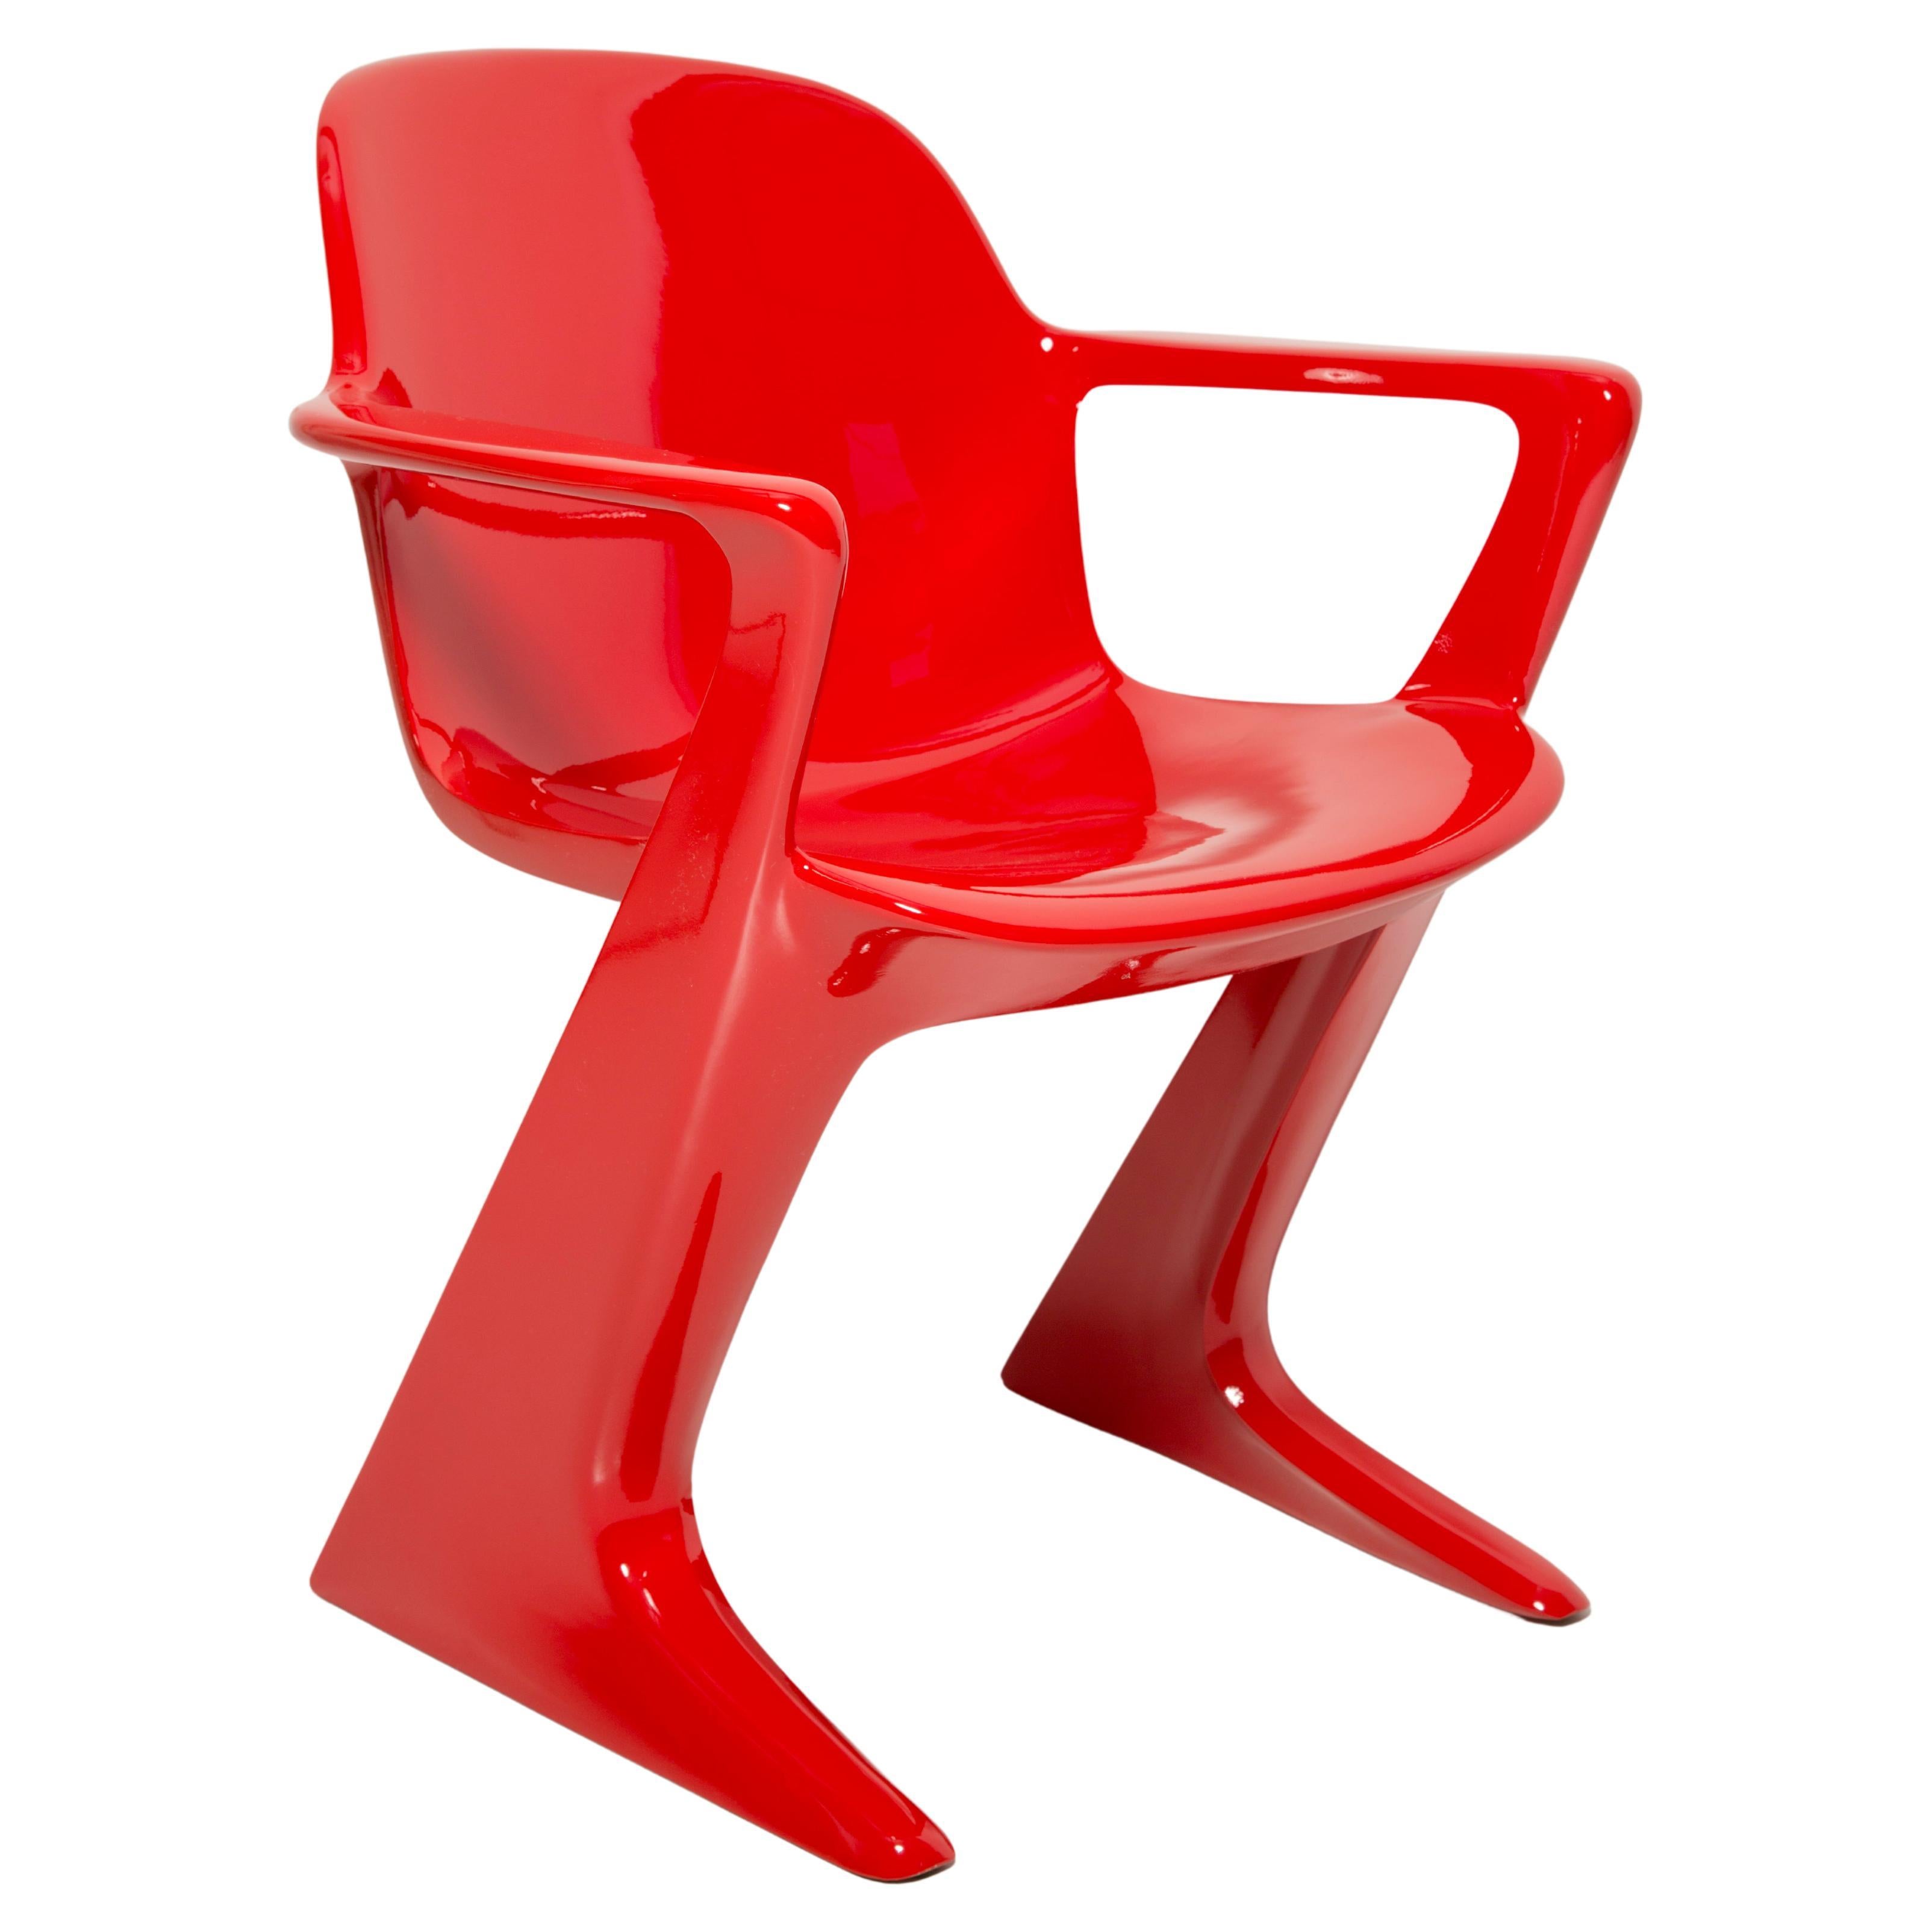 Midcentury Signal Red Kangaroo Chair Designed by Ernst Moeckl, Germany, 1968 For Sale